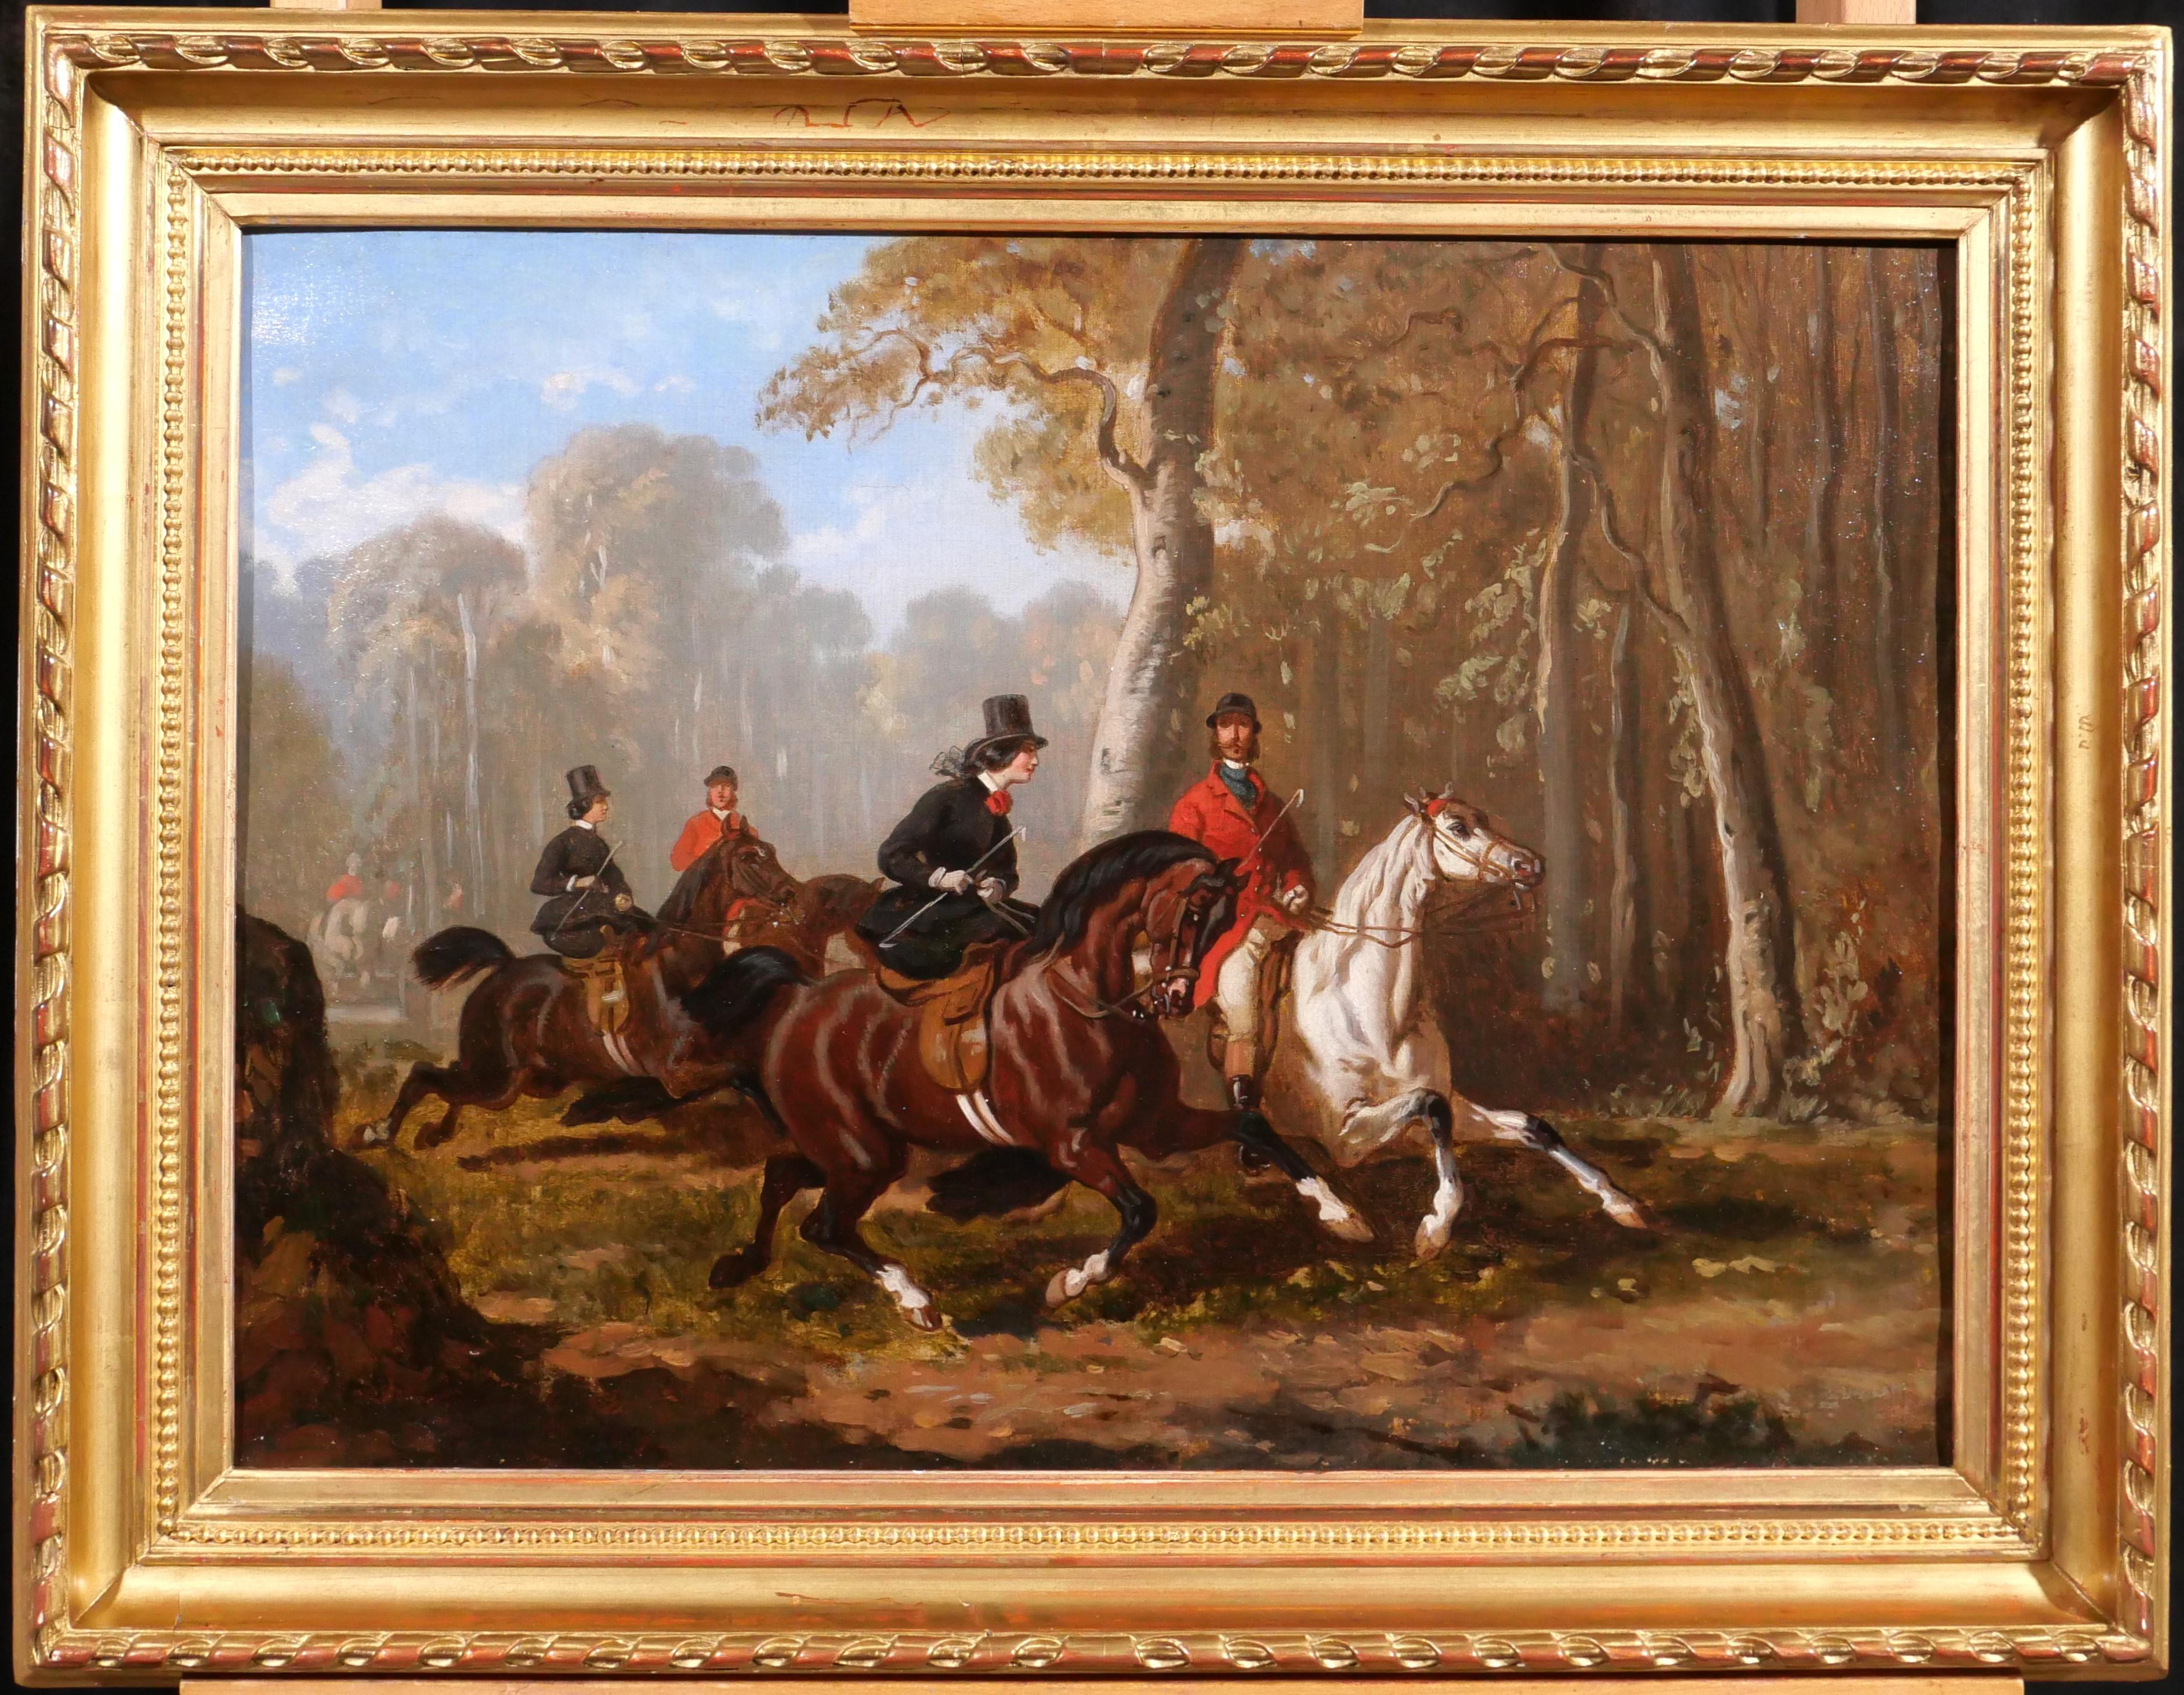 Amazons and horsemen on the hunt - Academic Painting by Victor Pinel de Grandchamps